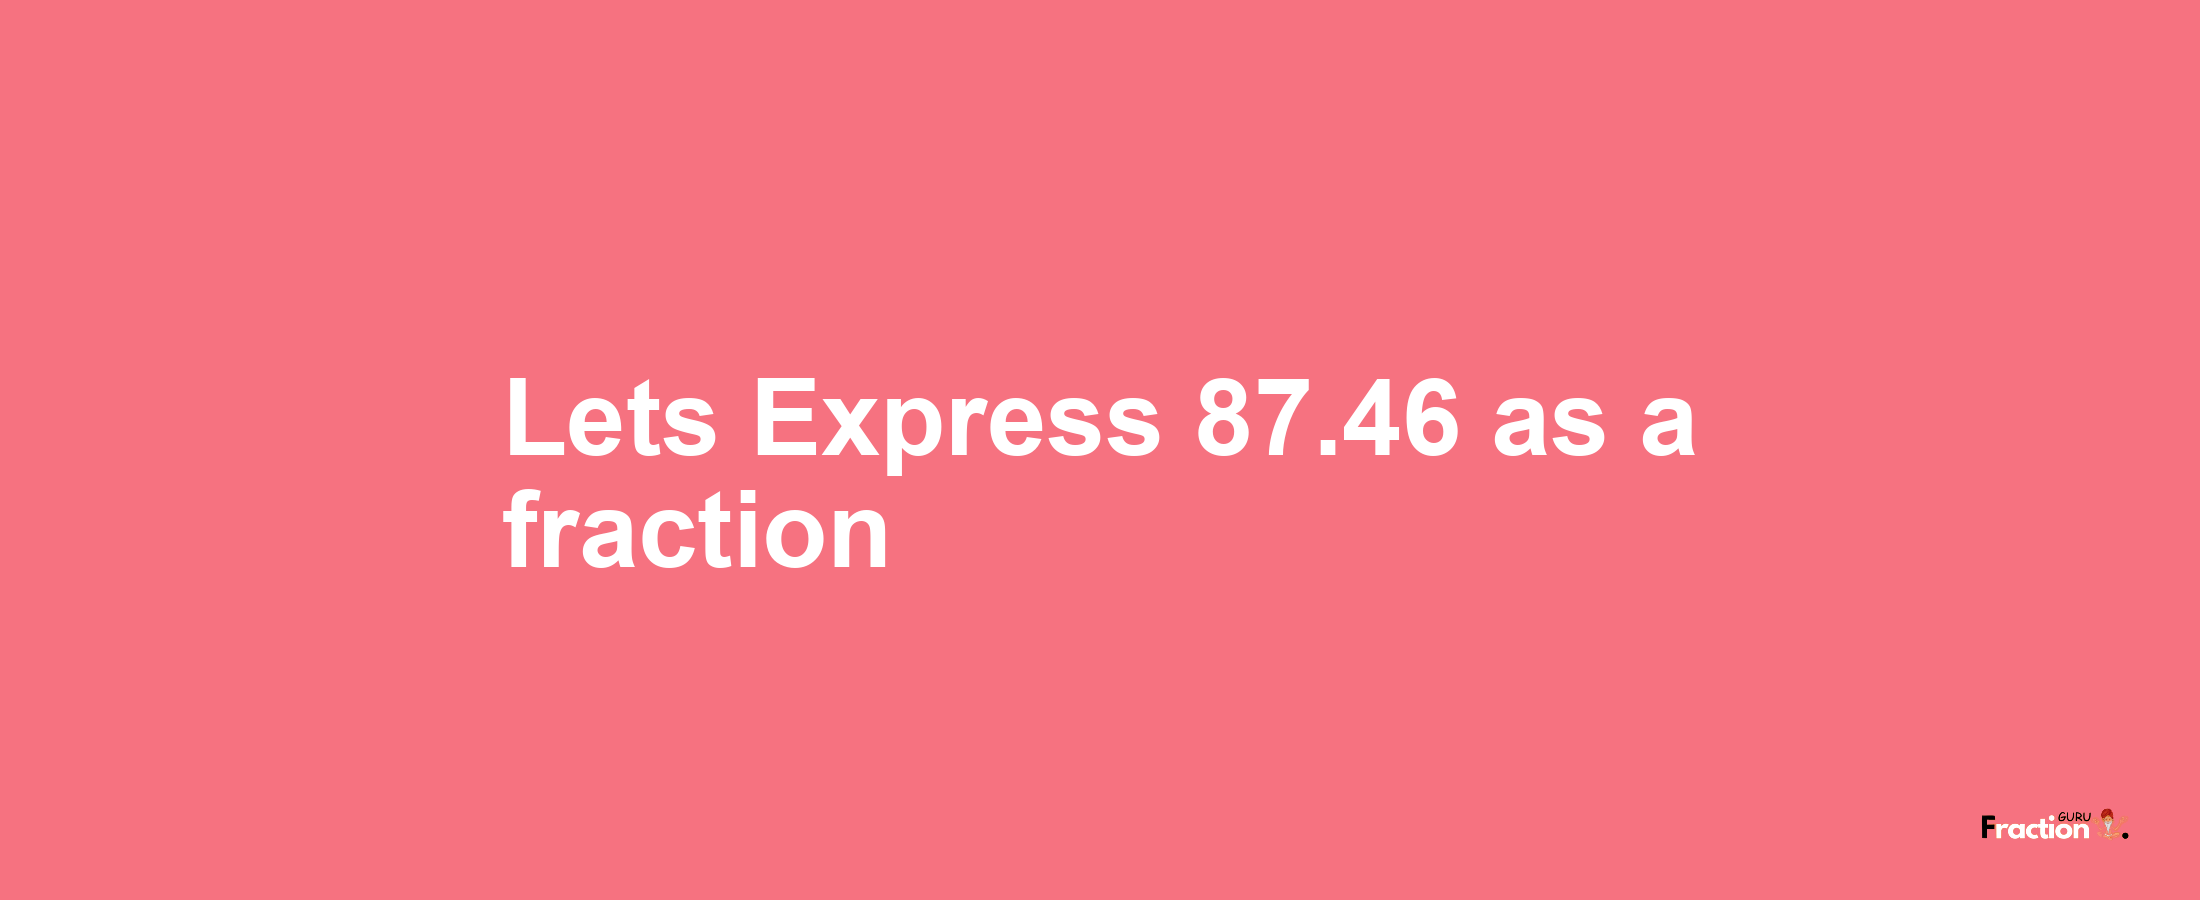 Lets Express 87.46 as afraction